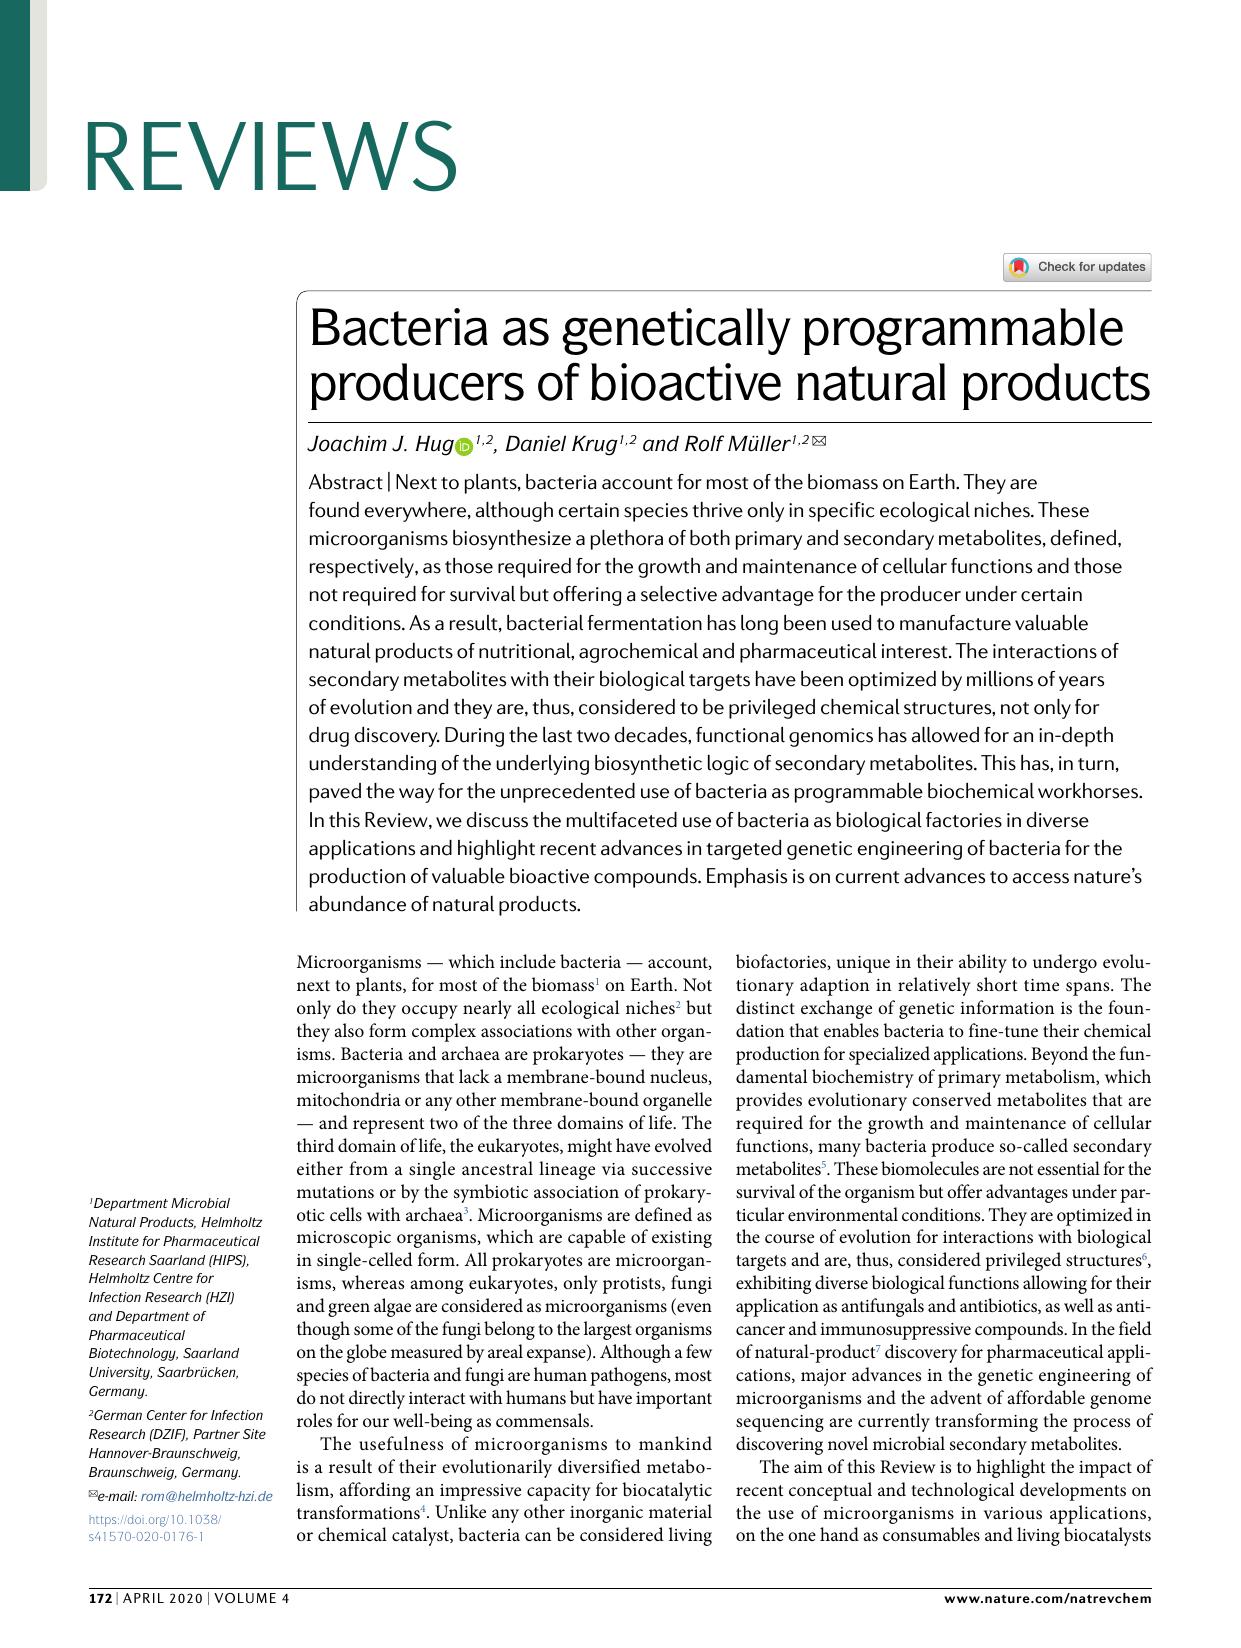 Bacteria as genetically programmable producers of bioactive natural products by Joachim J. Hug & Daniel Krug & Rolf Müller